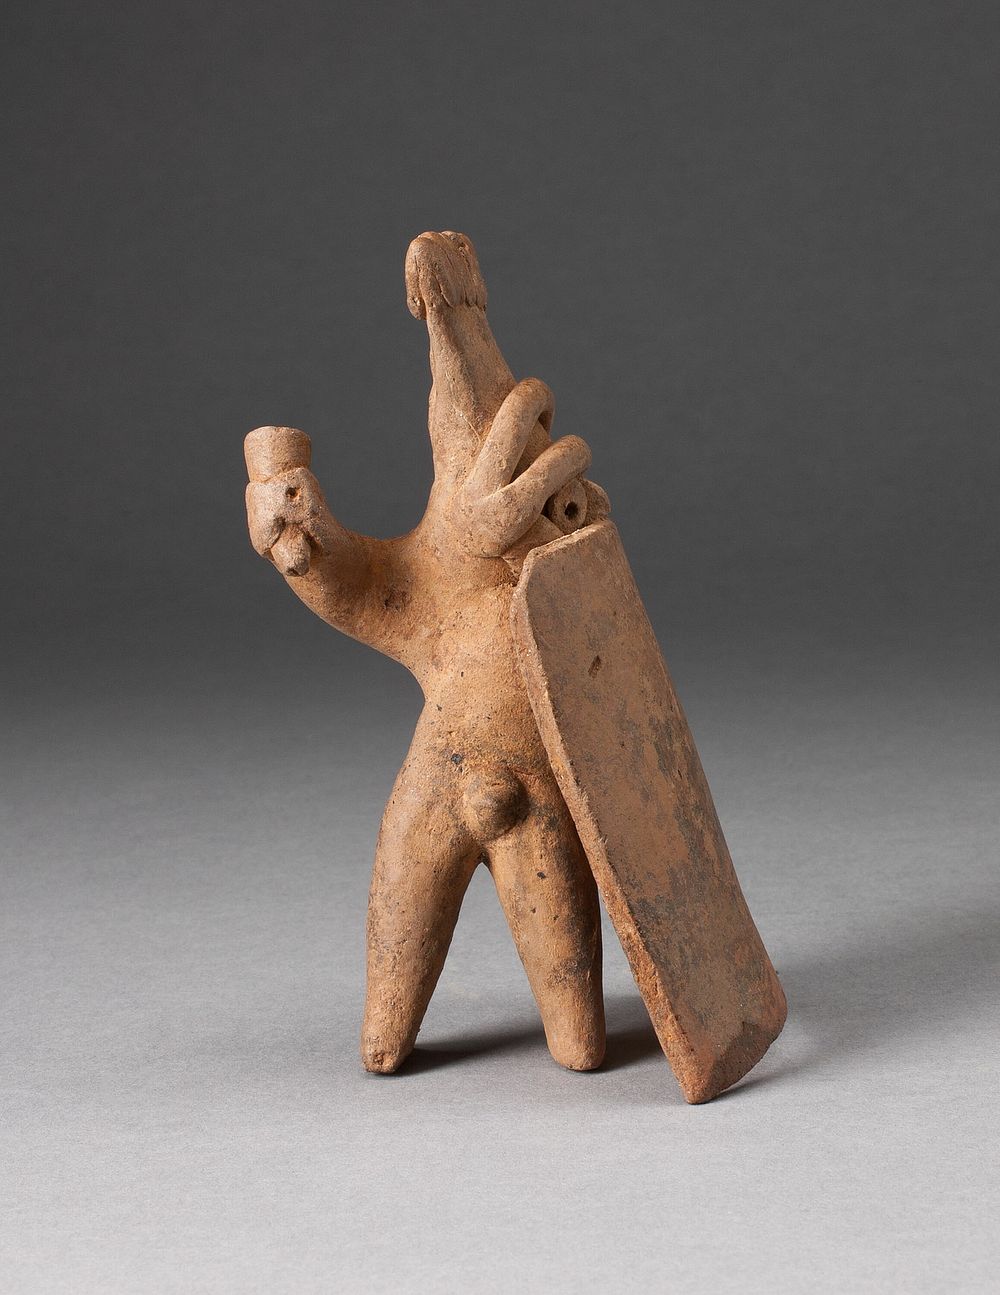 Figurine of a Warrior with Square Sheild and Weapon by Colima